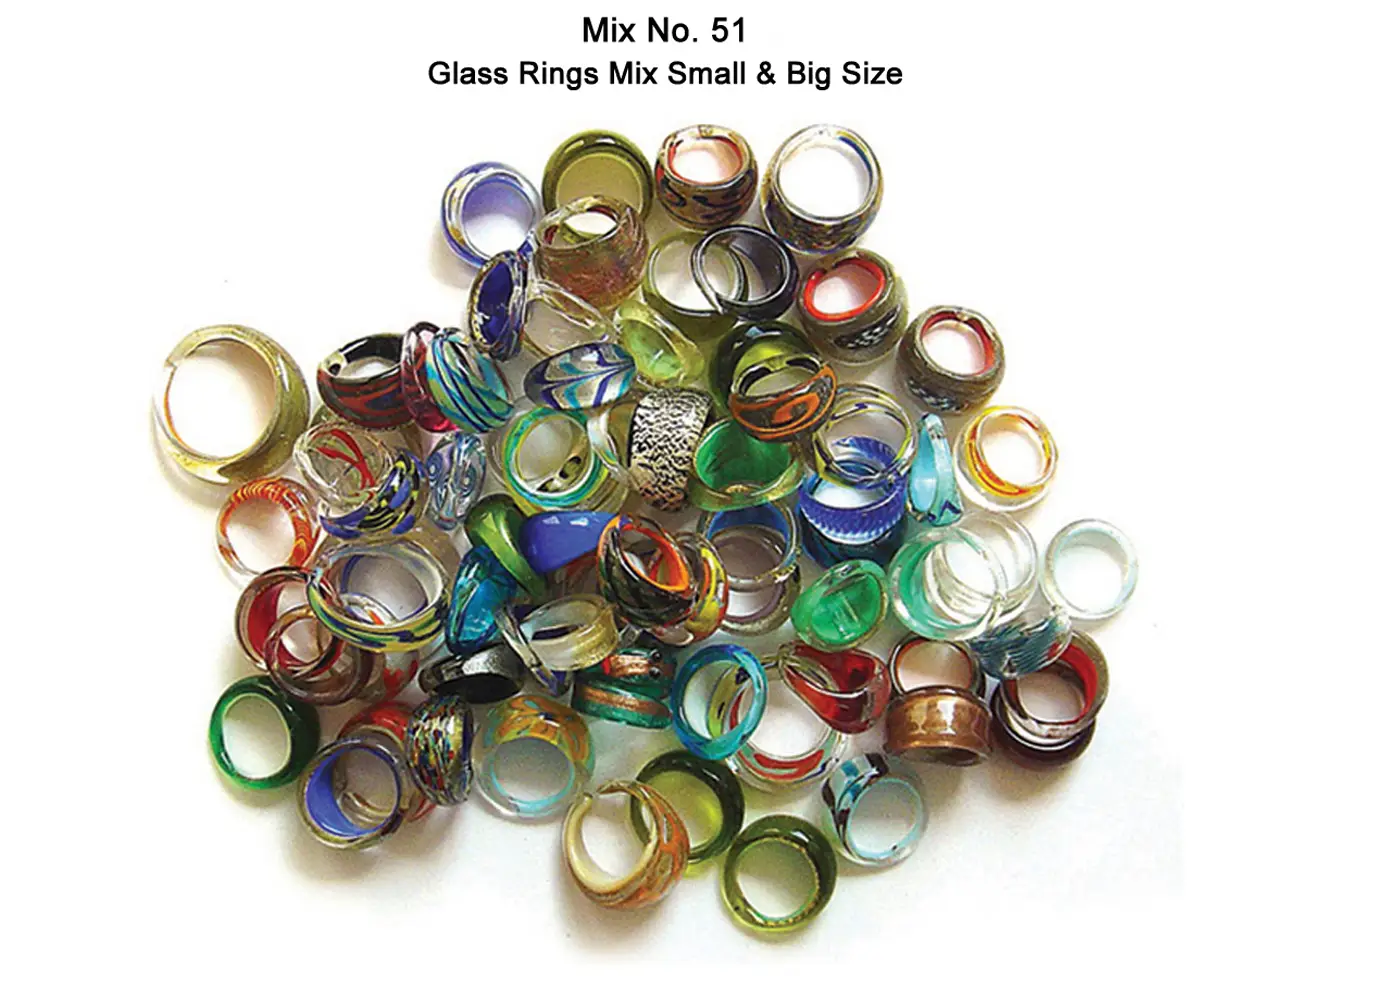 Glass Rings Mix Small & Big Size